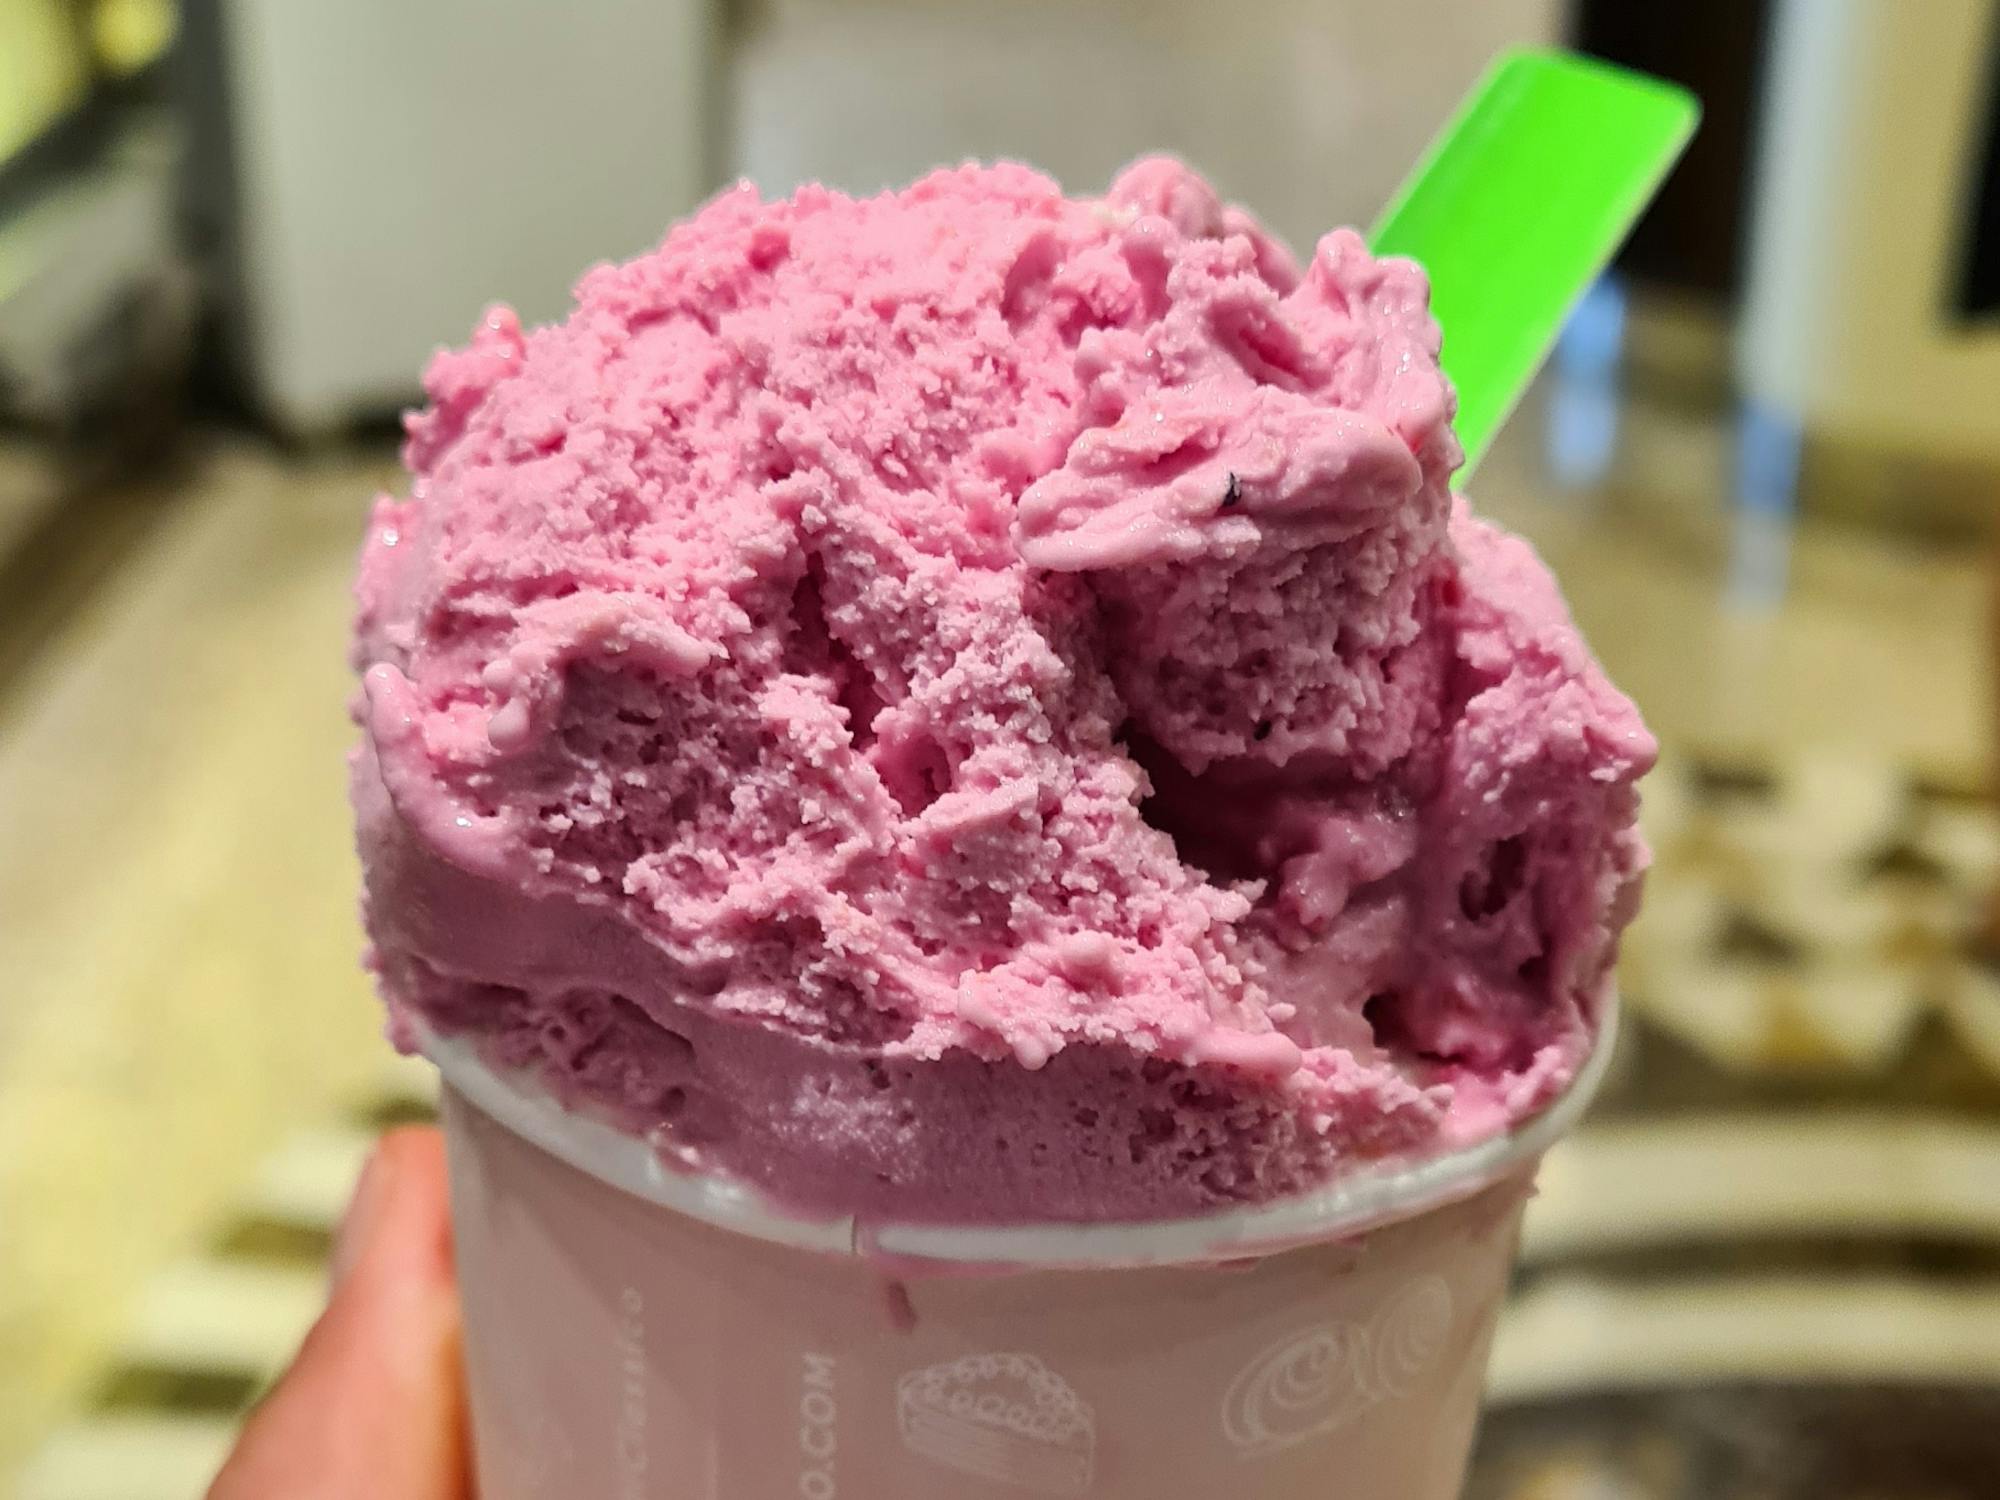 Vibrant deep pink ice cream in a cup